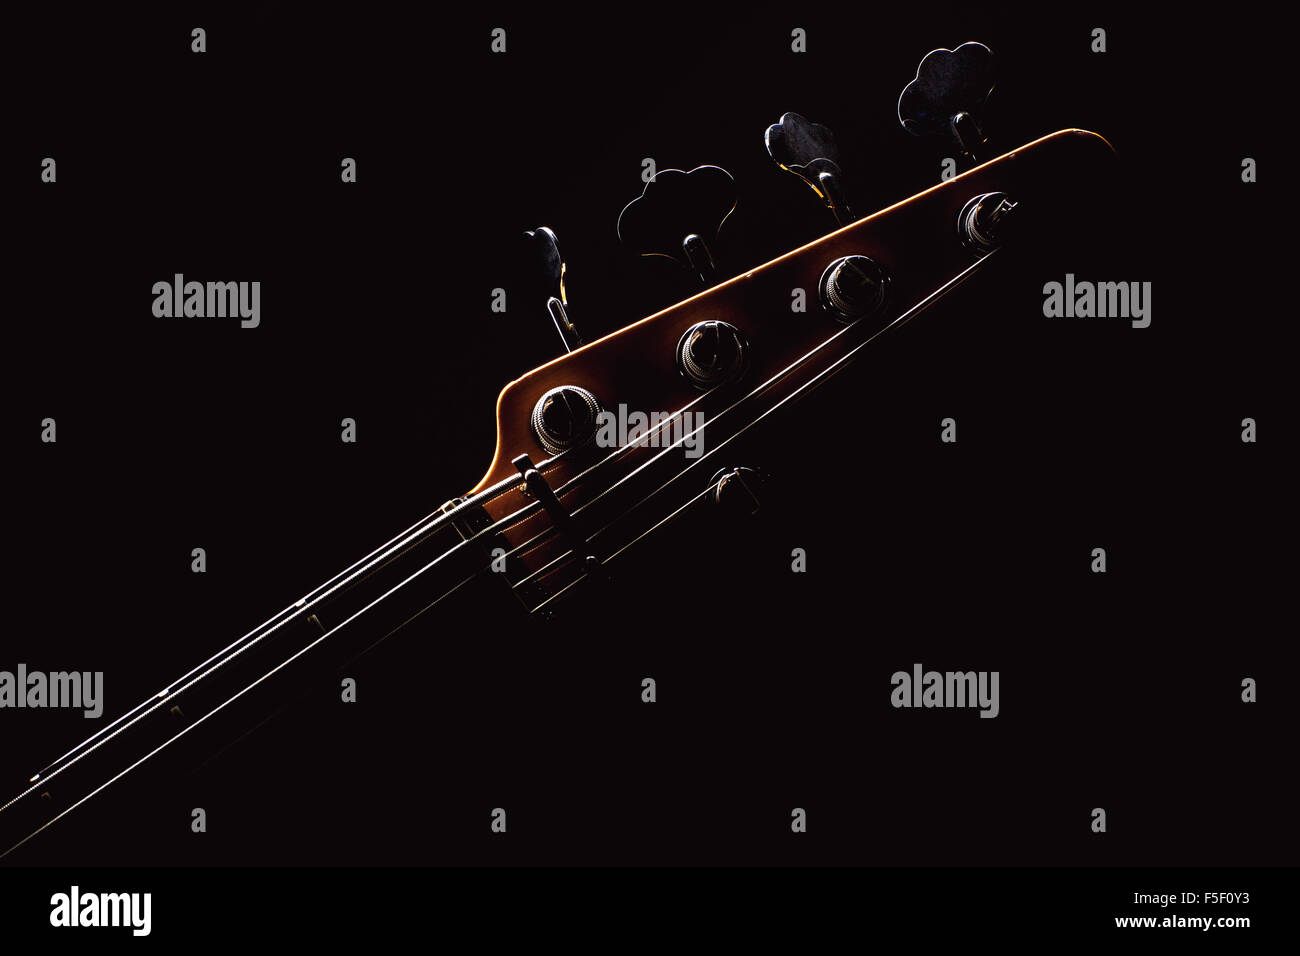 Part of a jazz bass guitar, accentuated shapes with illumination. Stock Photo